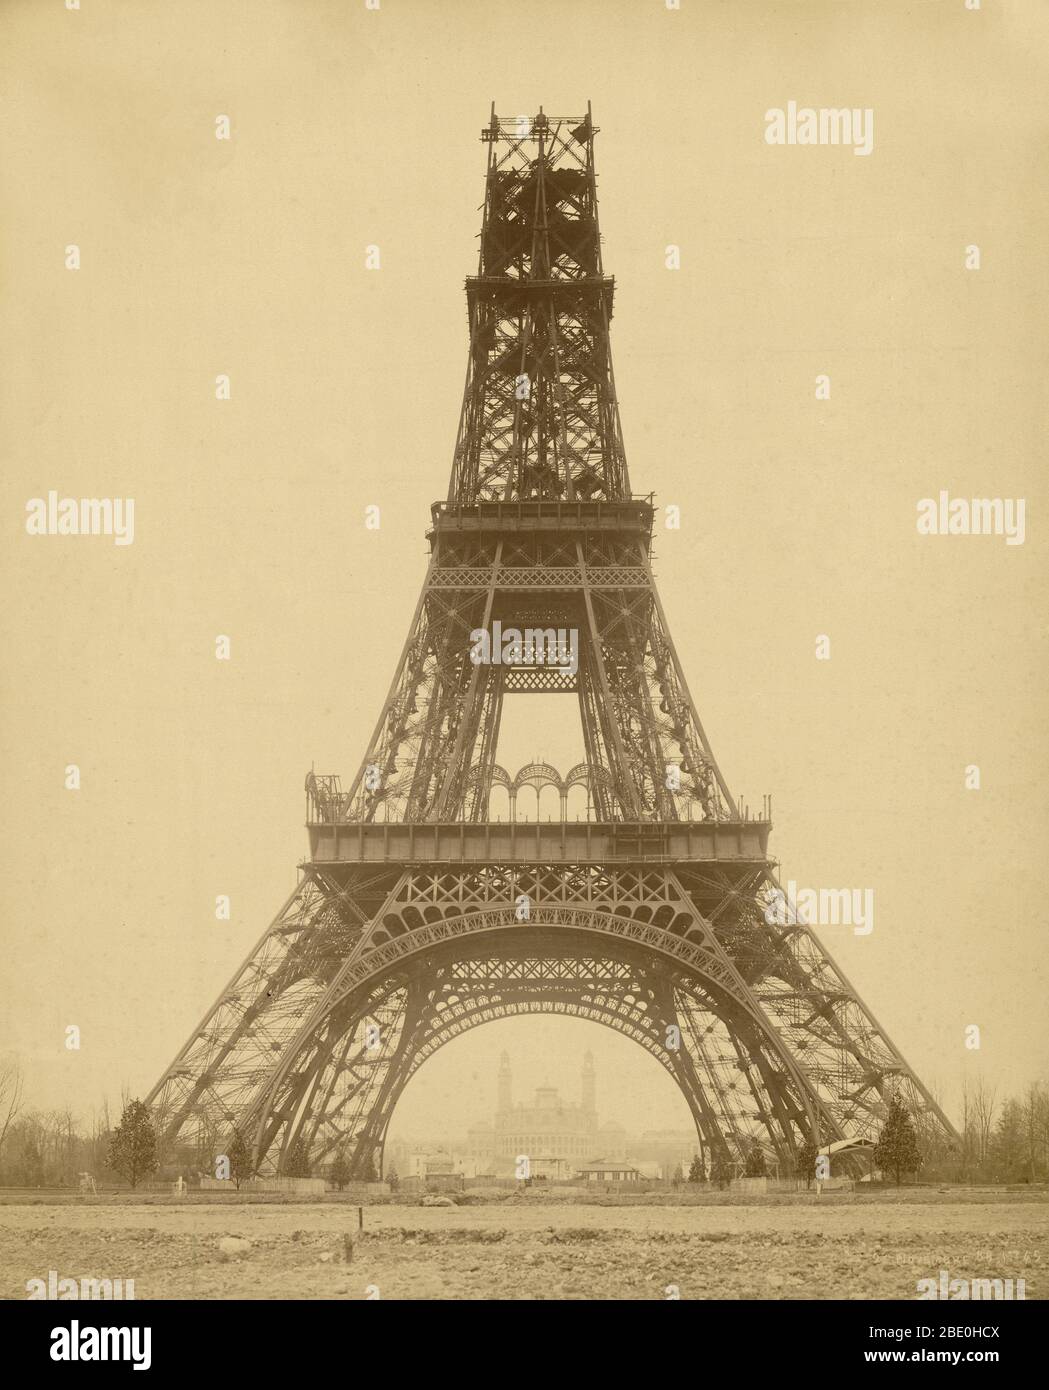 Eiffel Tower, Paris, France, November 23, 1888. This albumen silver print was made by Louis-Émile Durandelle (1839-1917) about four months before the tower's completion. Stock Photo